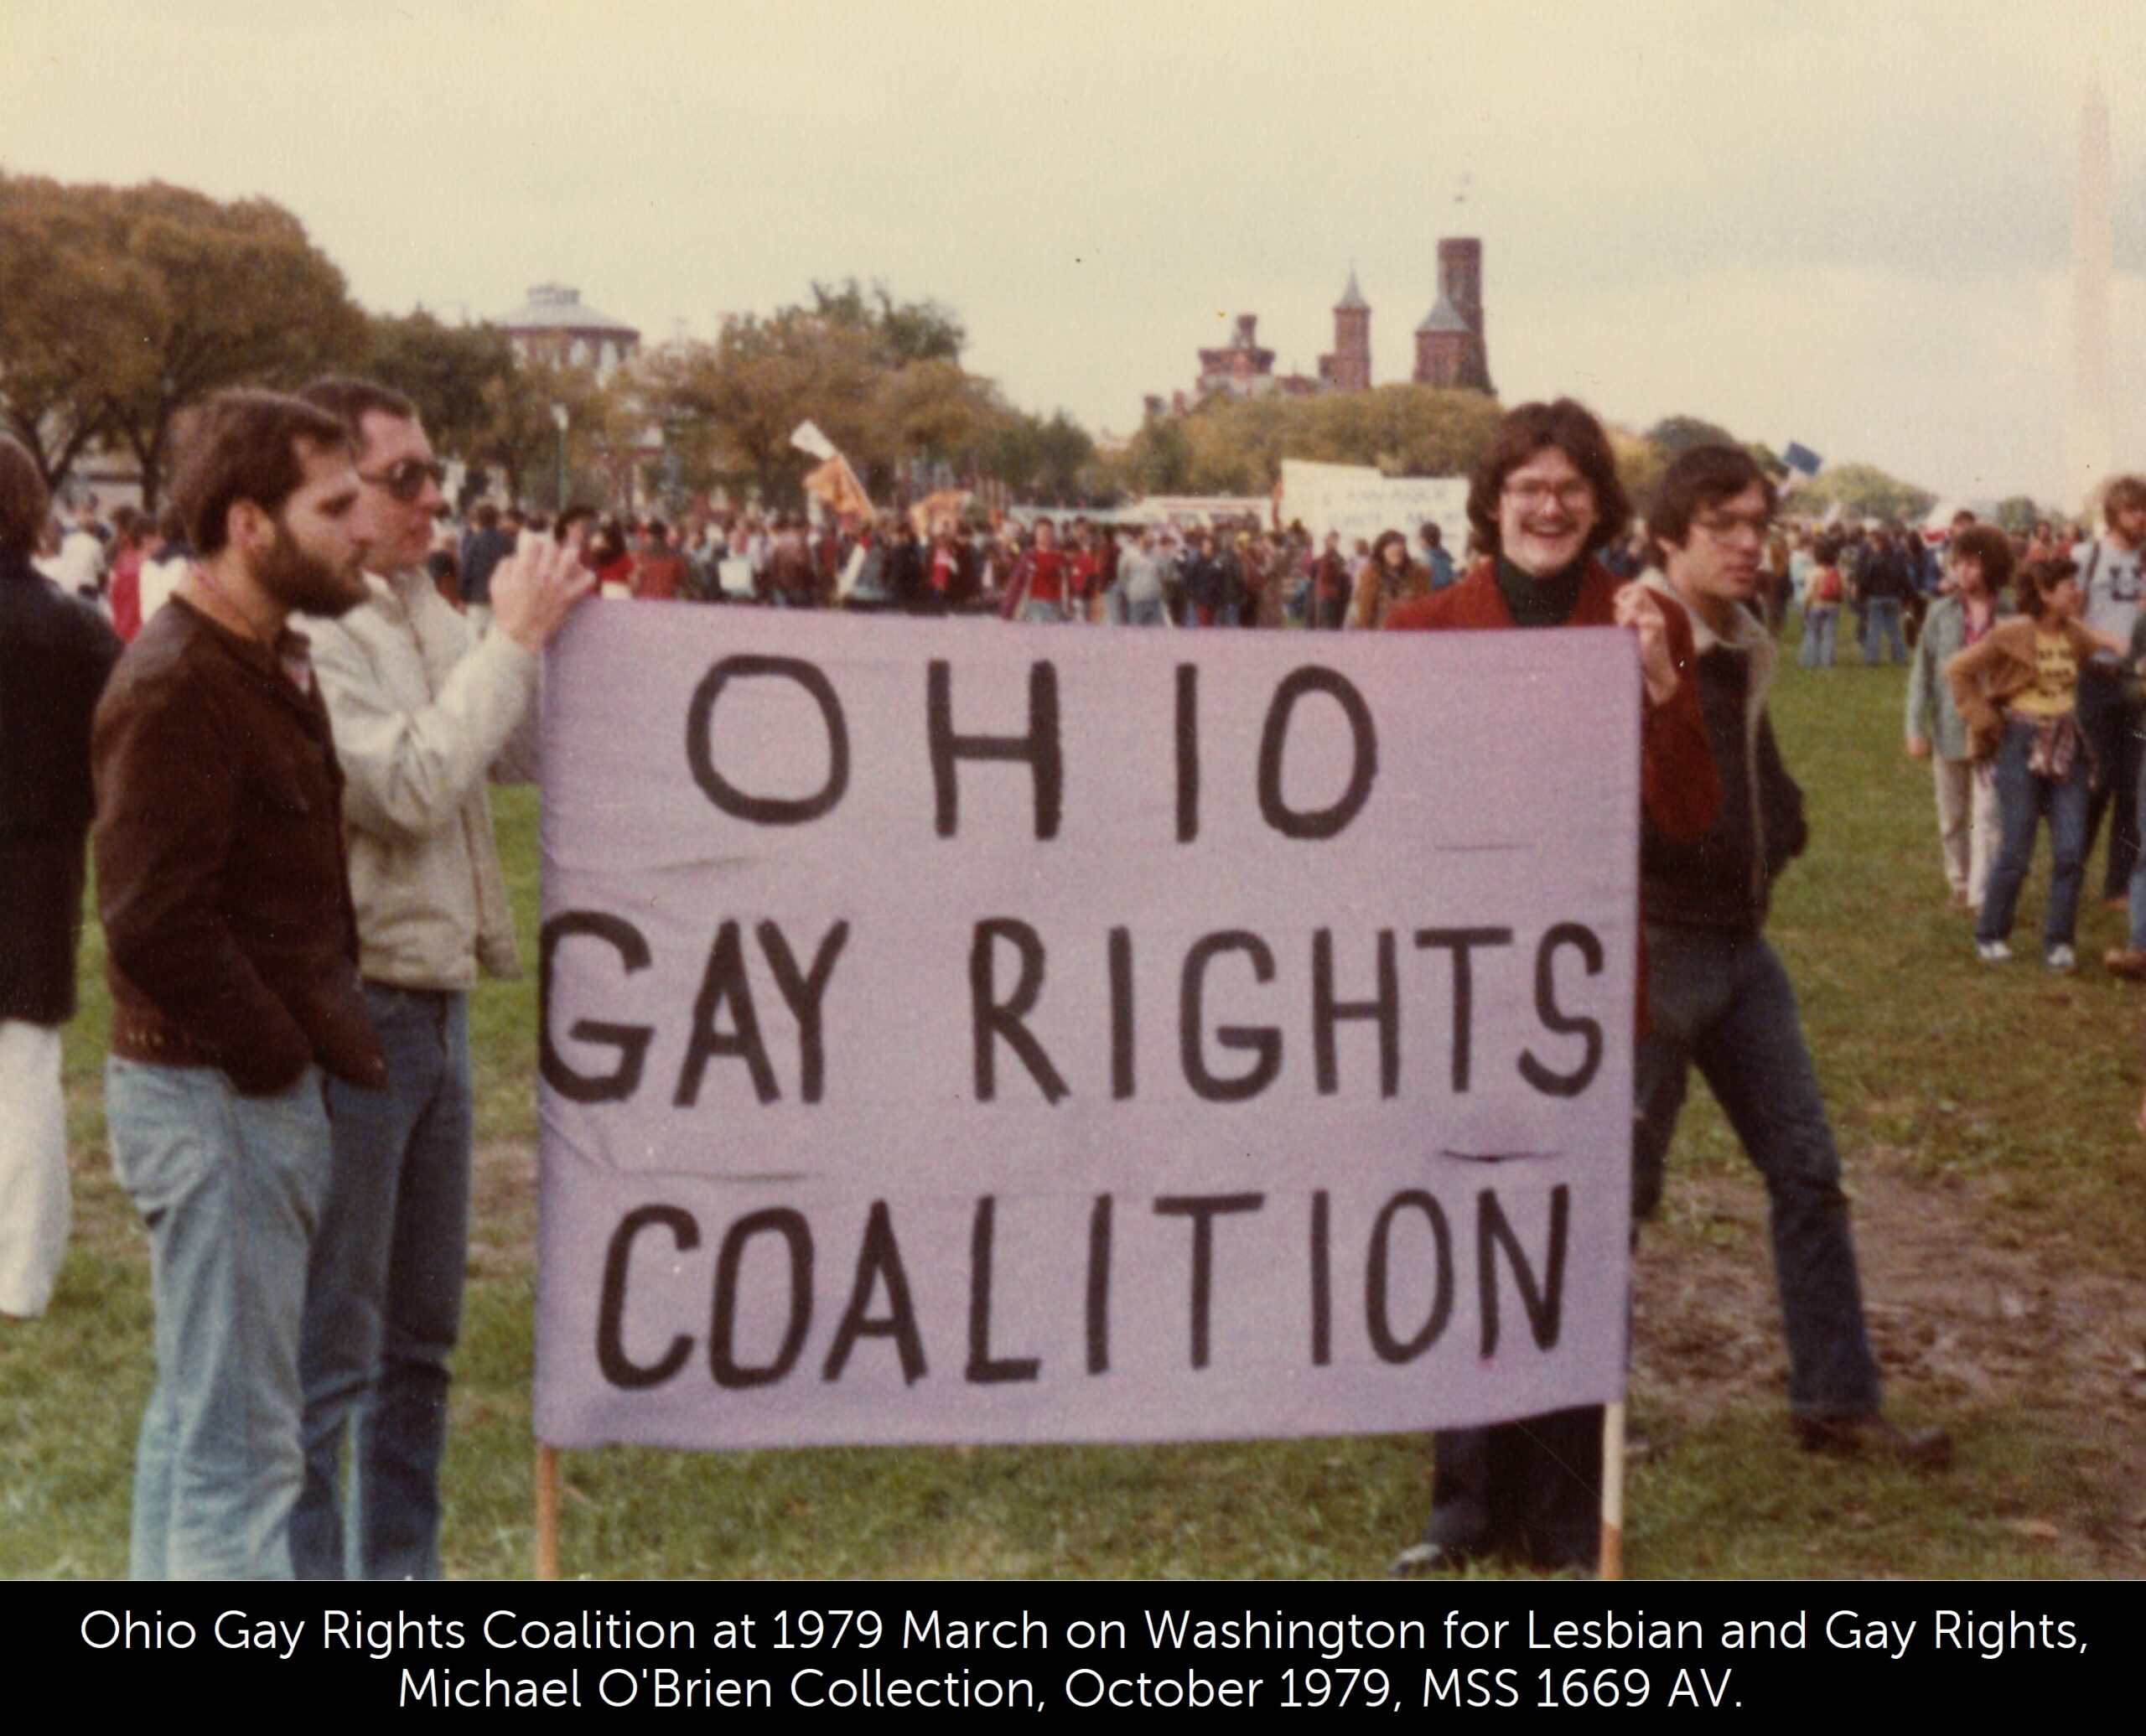 A photo of people holding a banner that says, "Ohio Gay Rights Coalition" on the National Mall in 1979